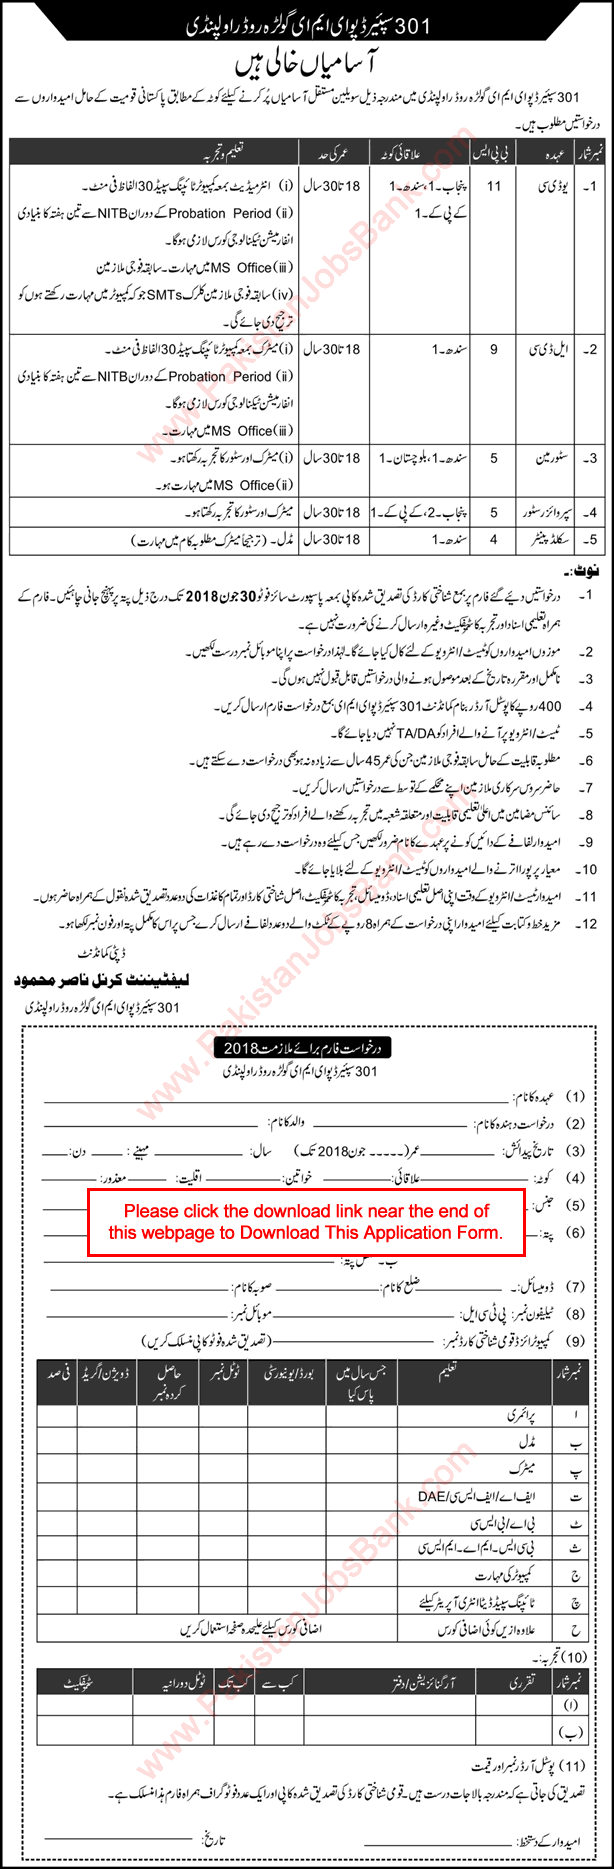 301 Spares Depot EME Rawalpindi Jobs 2018 June Application Form Clerks, Store Supervisors & Others Latest